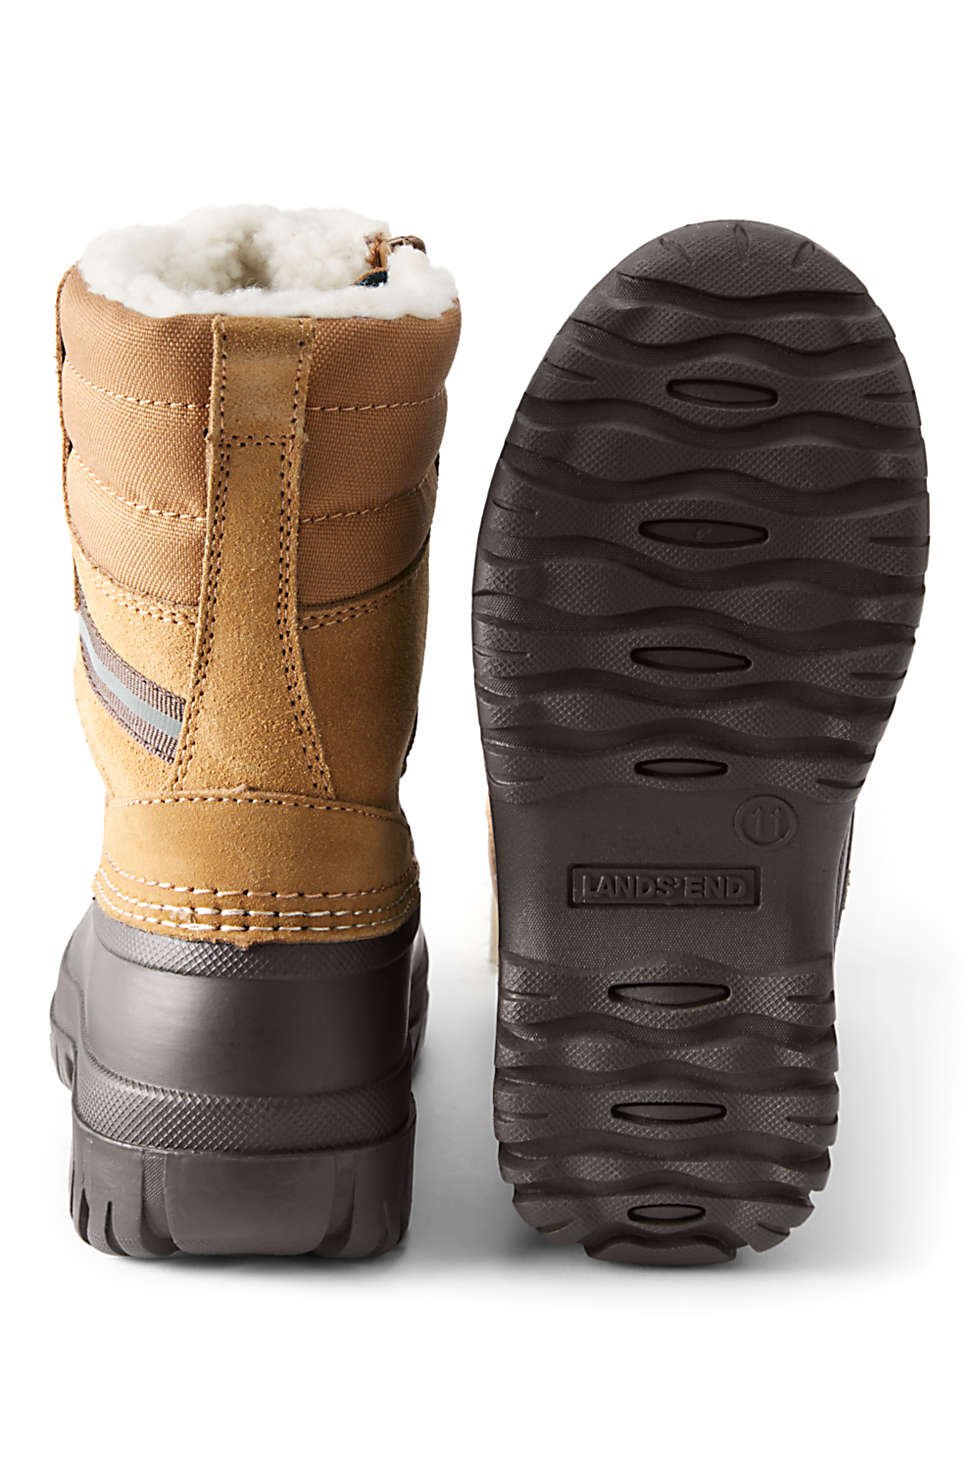 Lands End Kids Expedition Insulated Winter Snow Boots